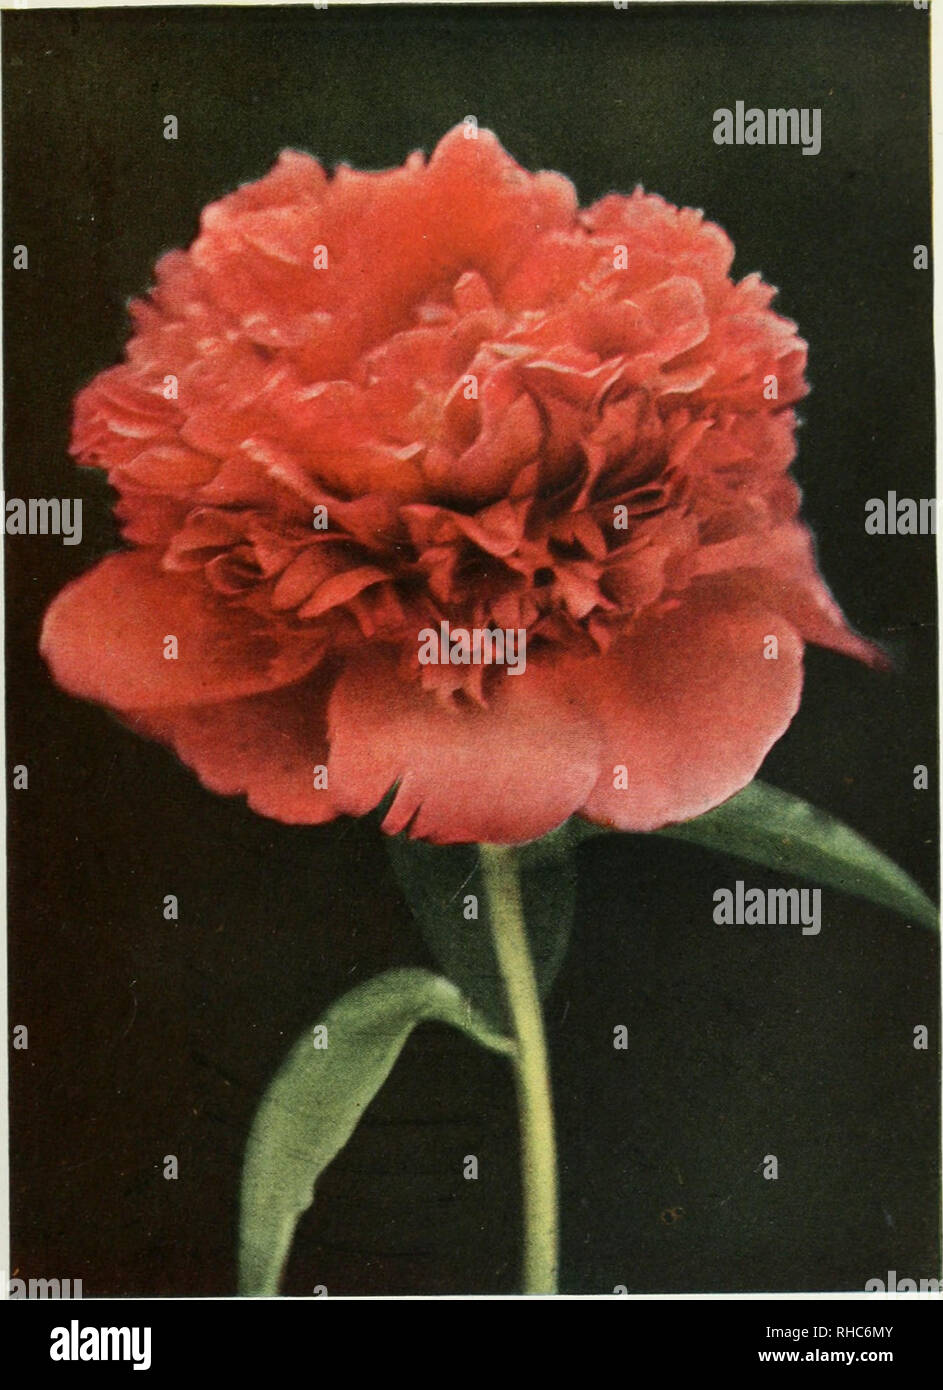 The Book Of The Peony Peonies Felix Crousse Crousse 1881 Bomb Type A Brilliant Flower Of Good Form Which Blooms Freely Please Note That These Images Are Extracted From Scanned Page